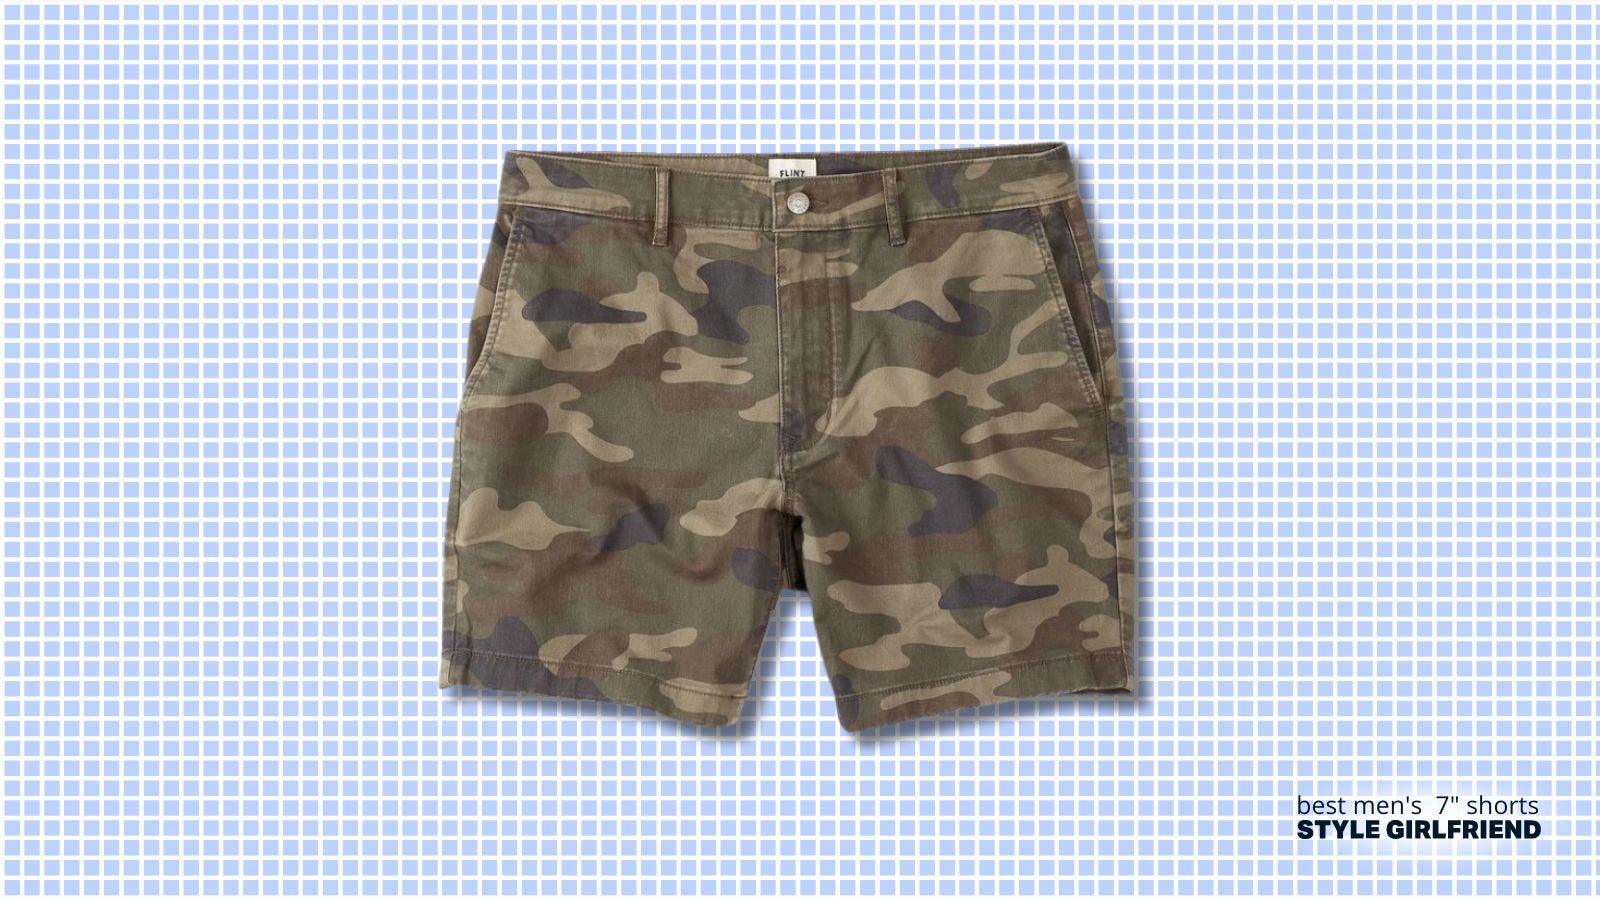 pair of camouflage-patterned shorts against a blue check background. text on-screen reads: best 7-inch shorts for men